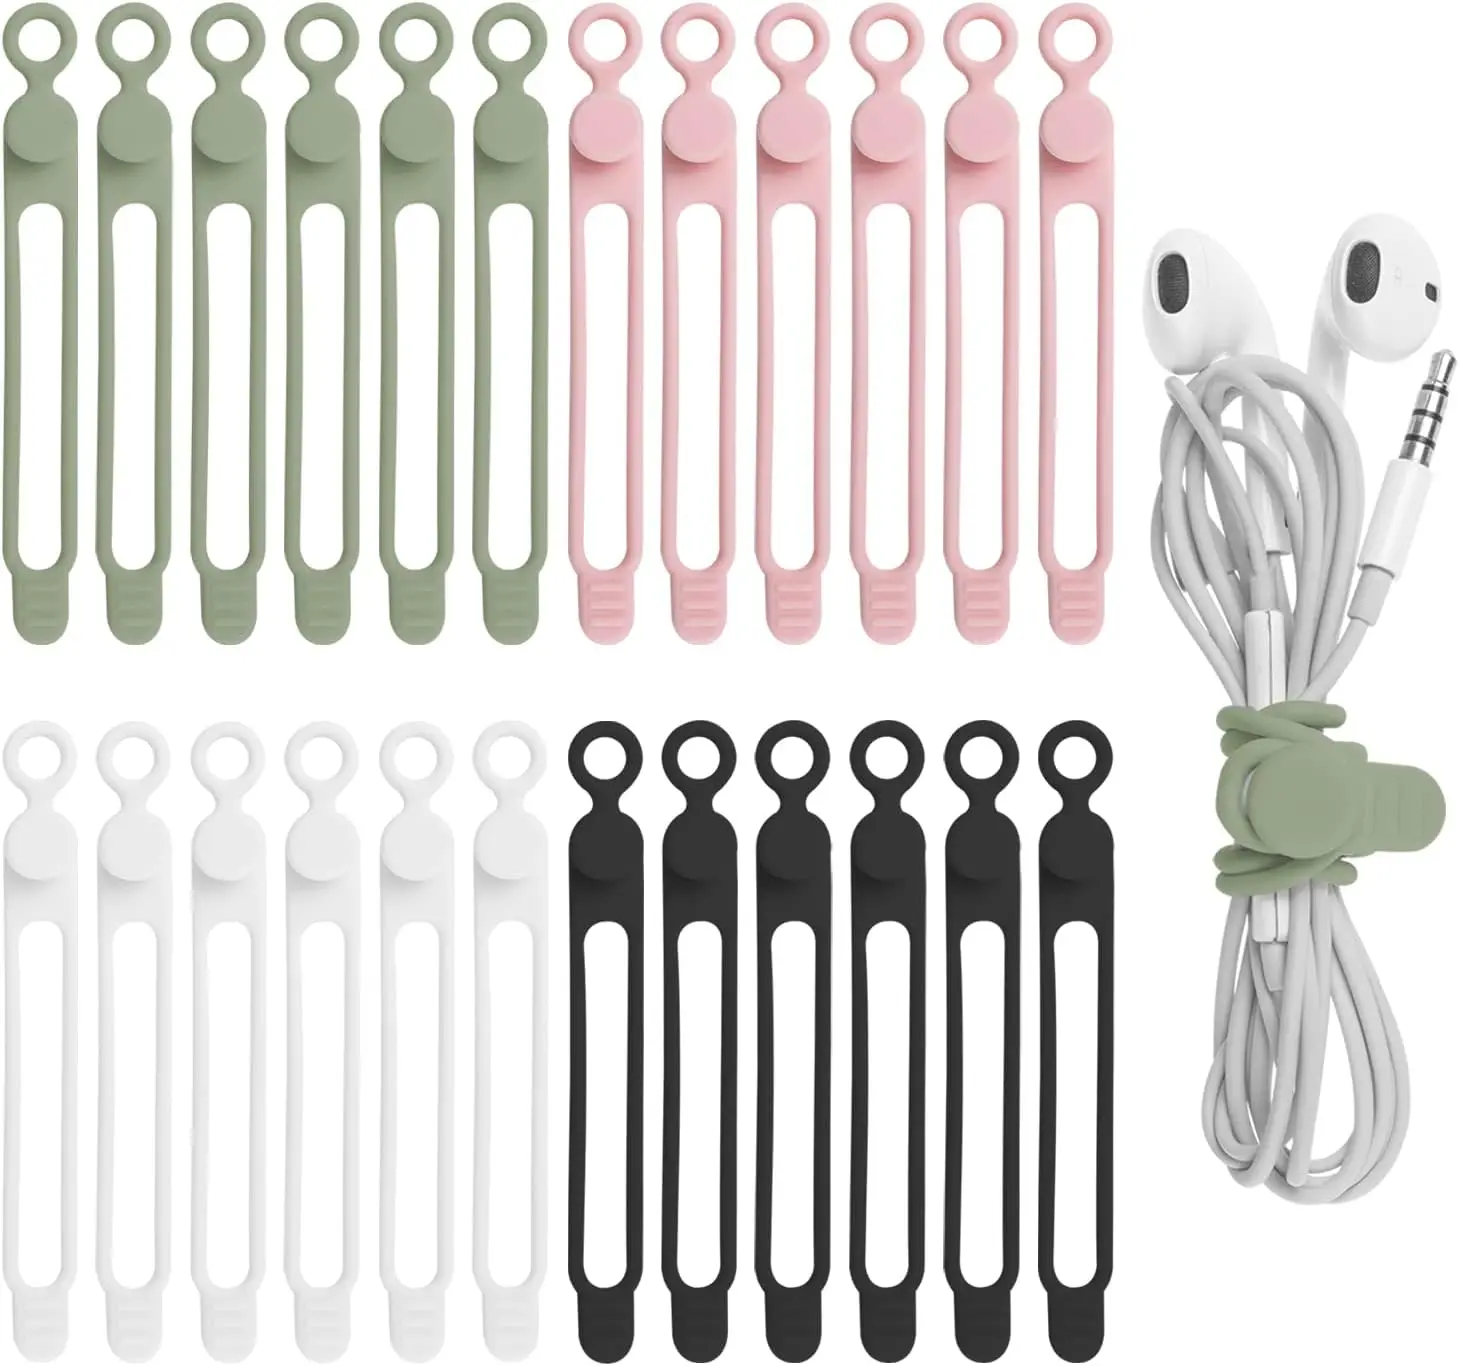 

Hongyucable Silicone Anti-lost Earphone Cord Colorful Reusable Holder Strap Organizer Management for Fastening Cable Cords